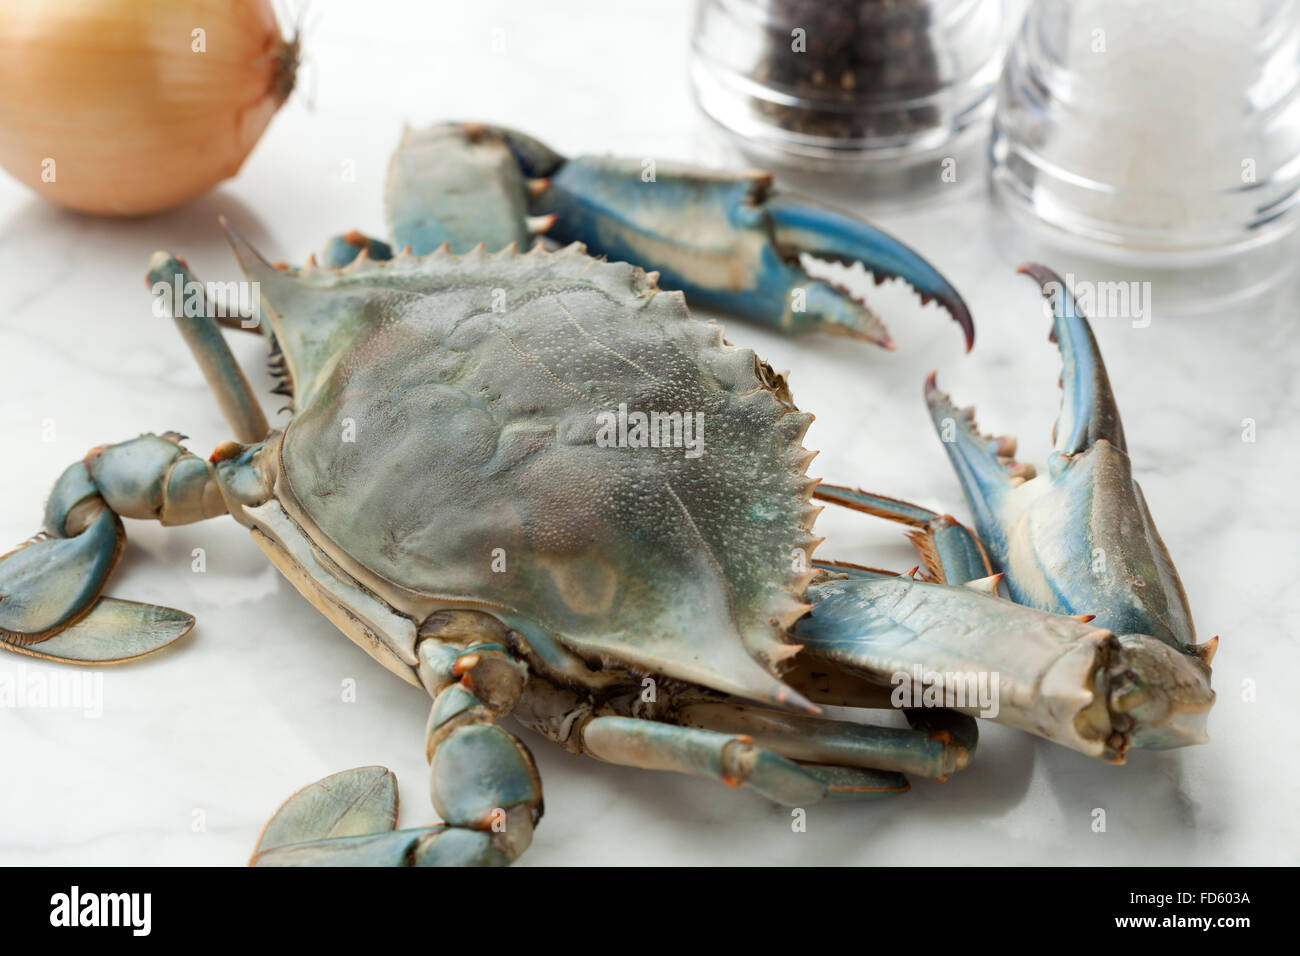 Fresh single blue crab ready to cook Stock Photo